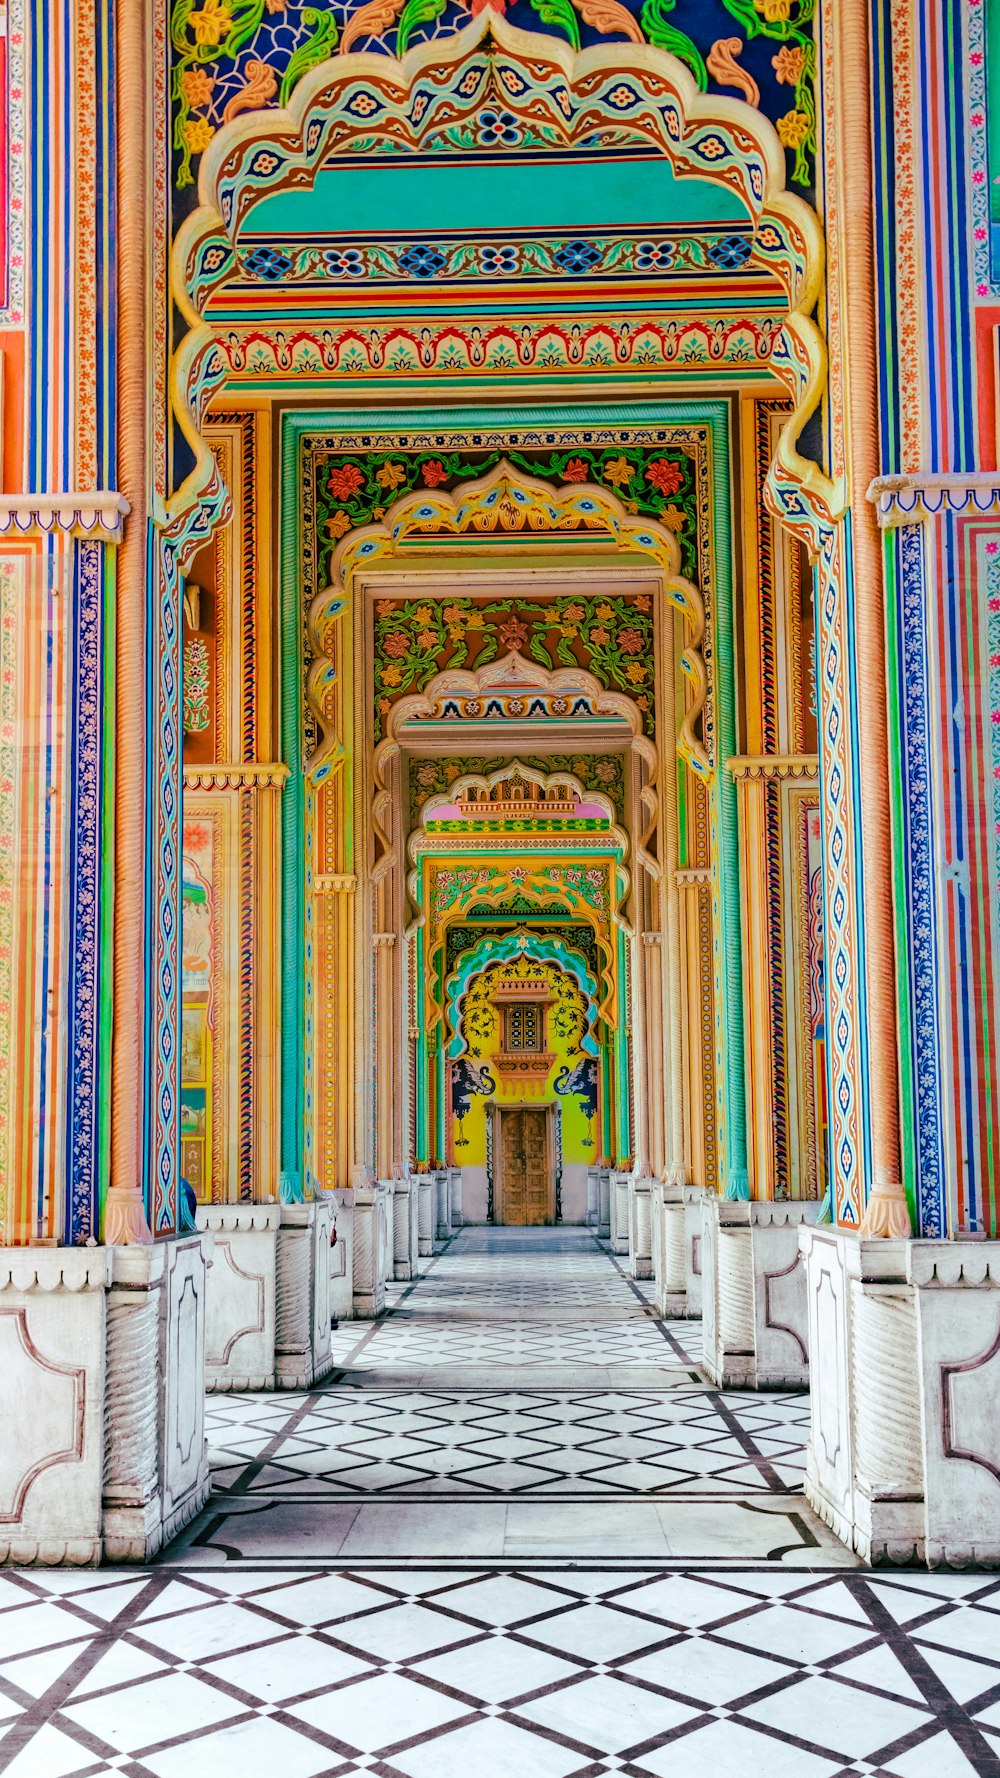 a colorful building with columns and a tiled floor